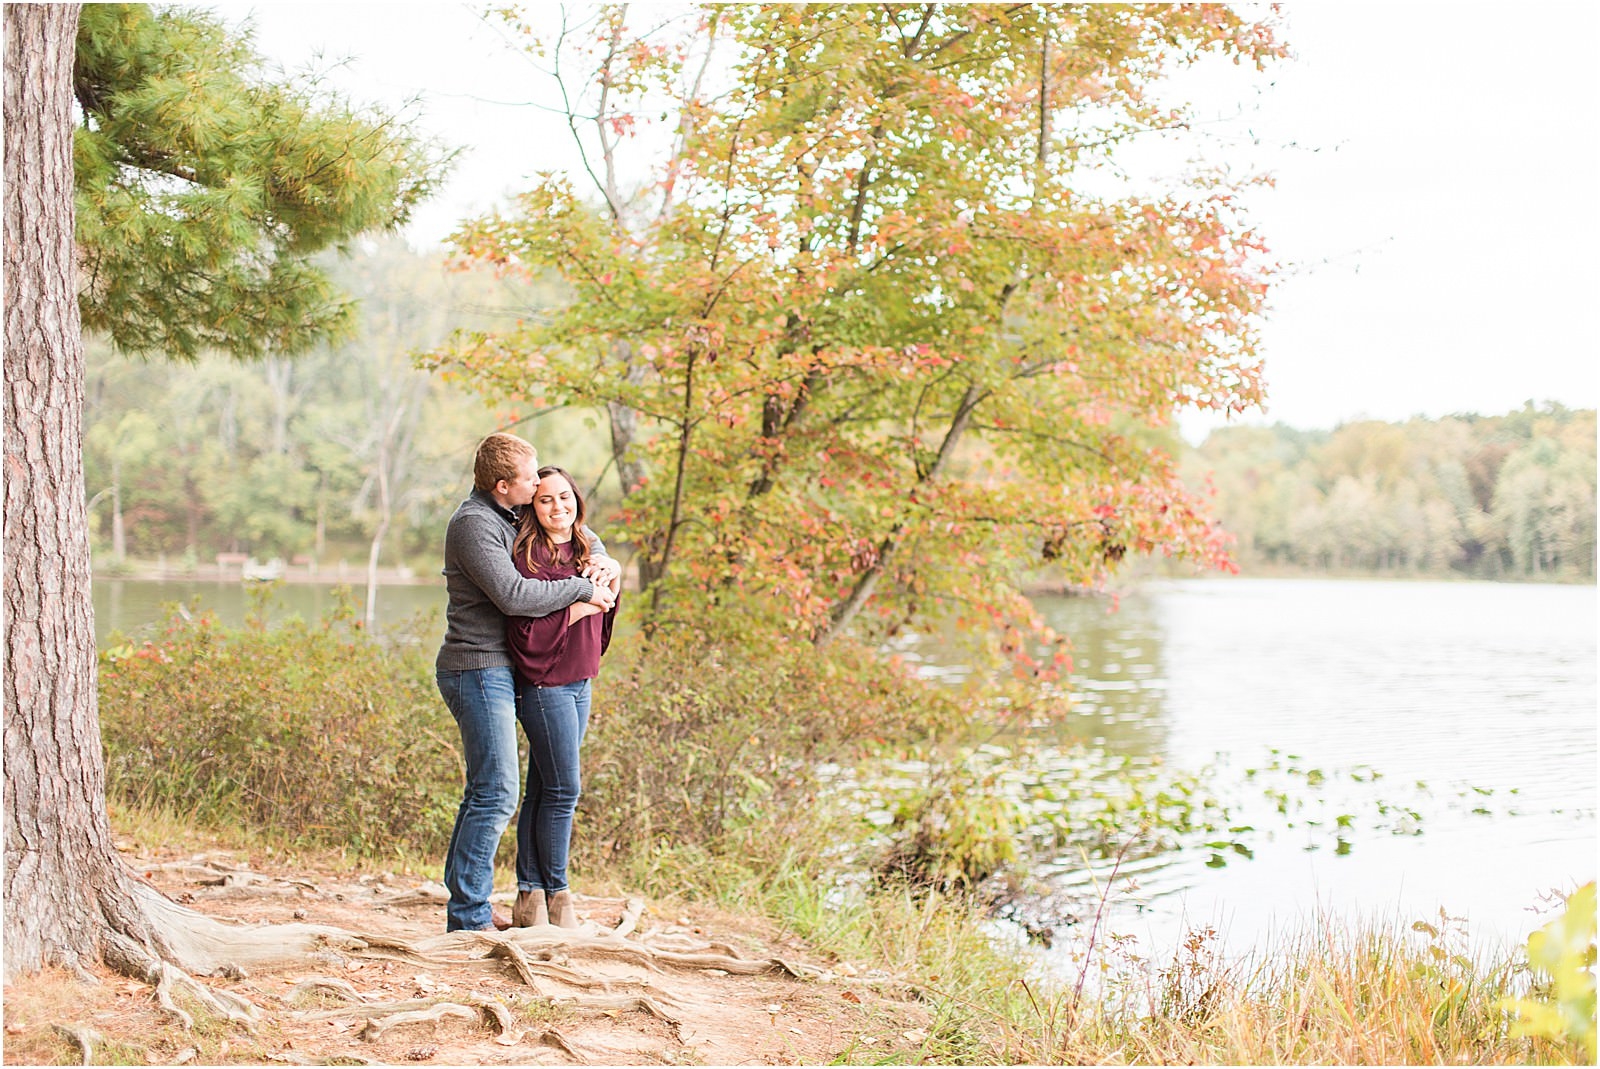 A Lincoln State Park Engagemtent Session | Deidra and Andrew | Bret and Brandie Photography 0021.jpg